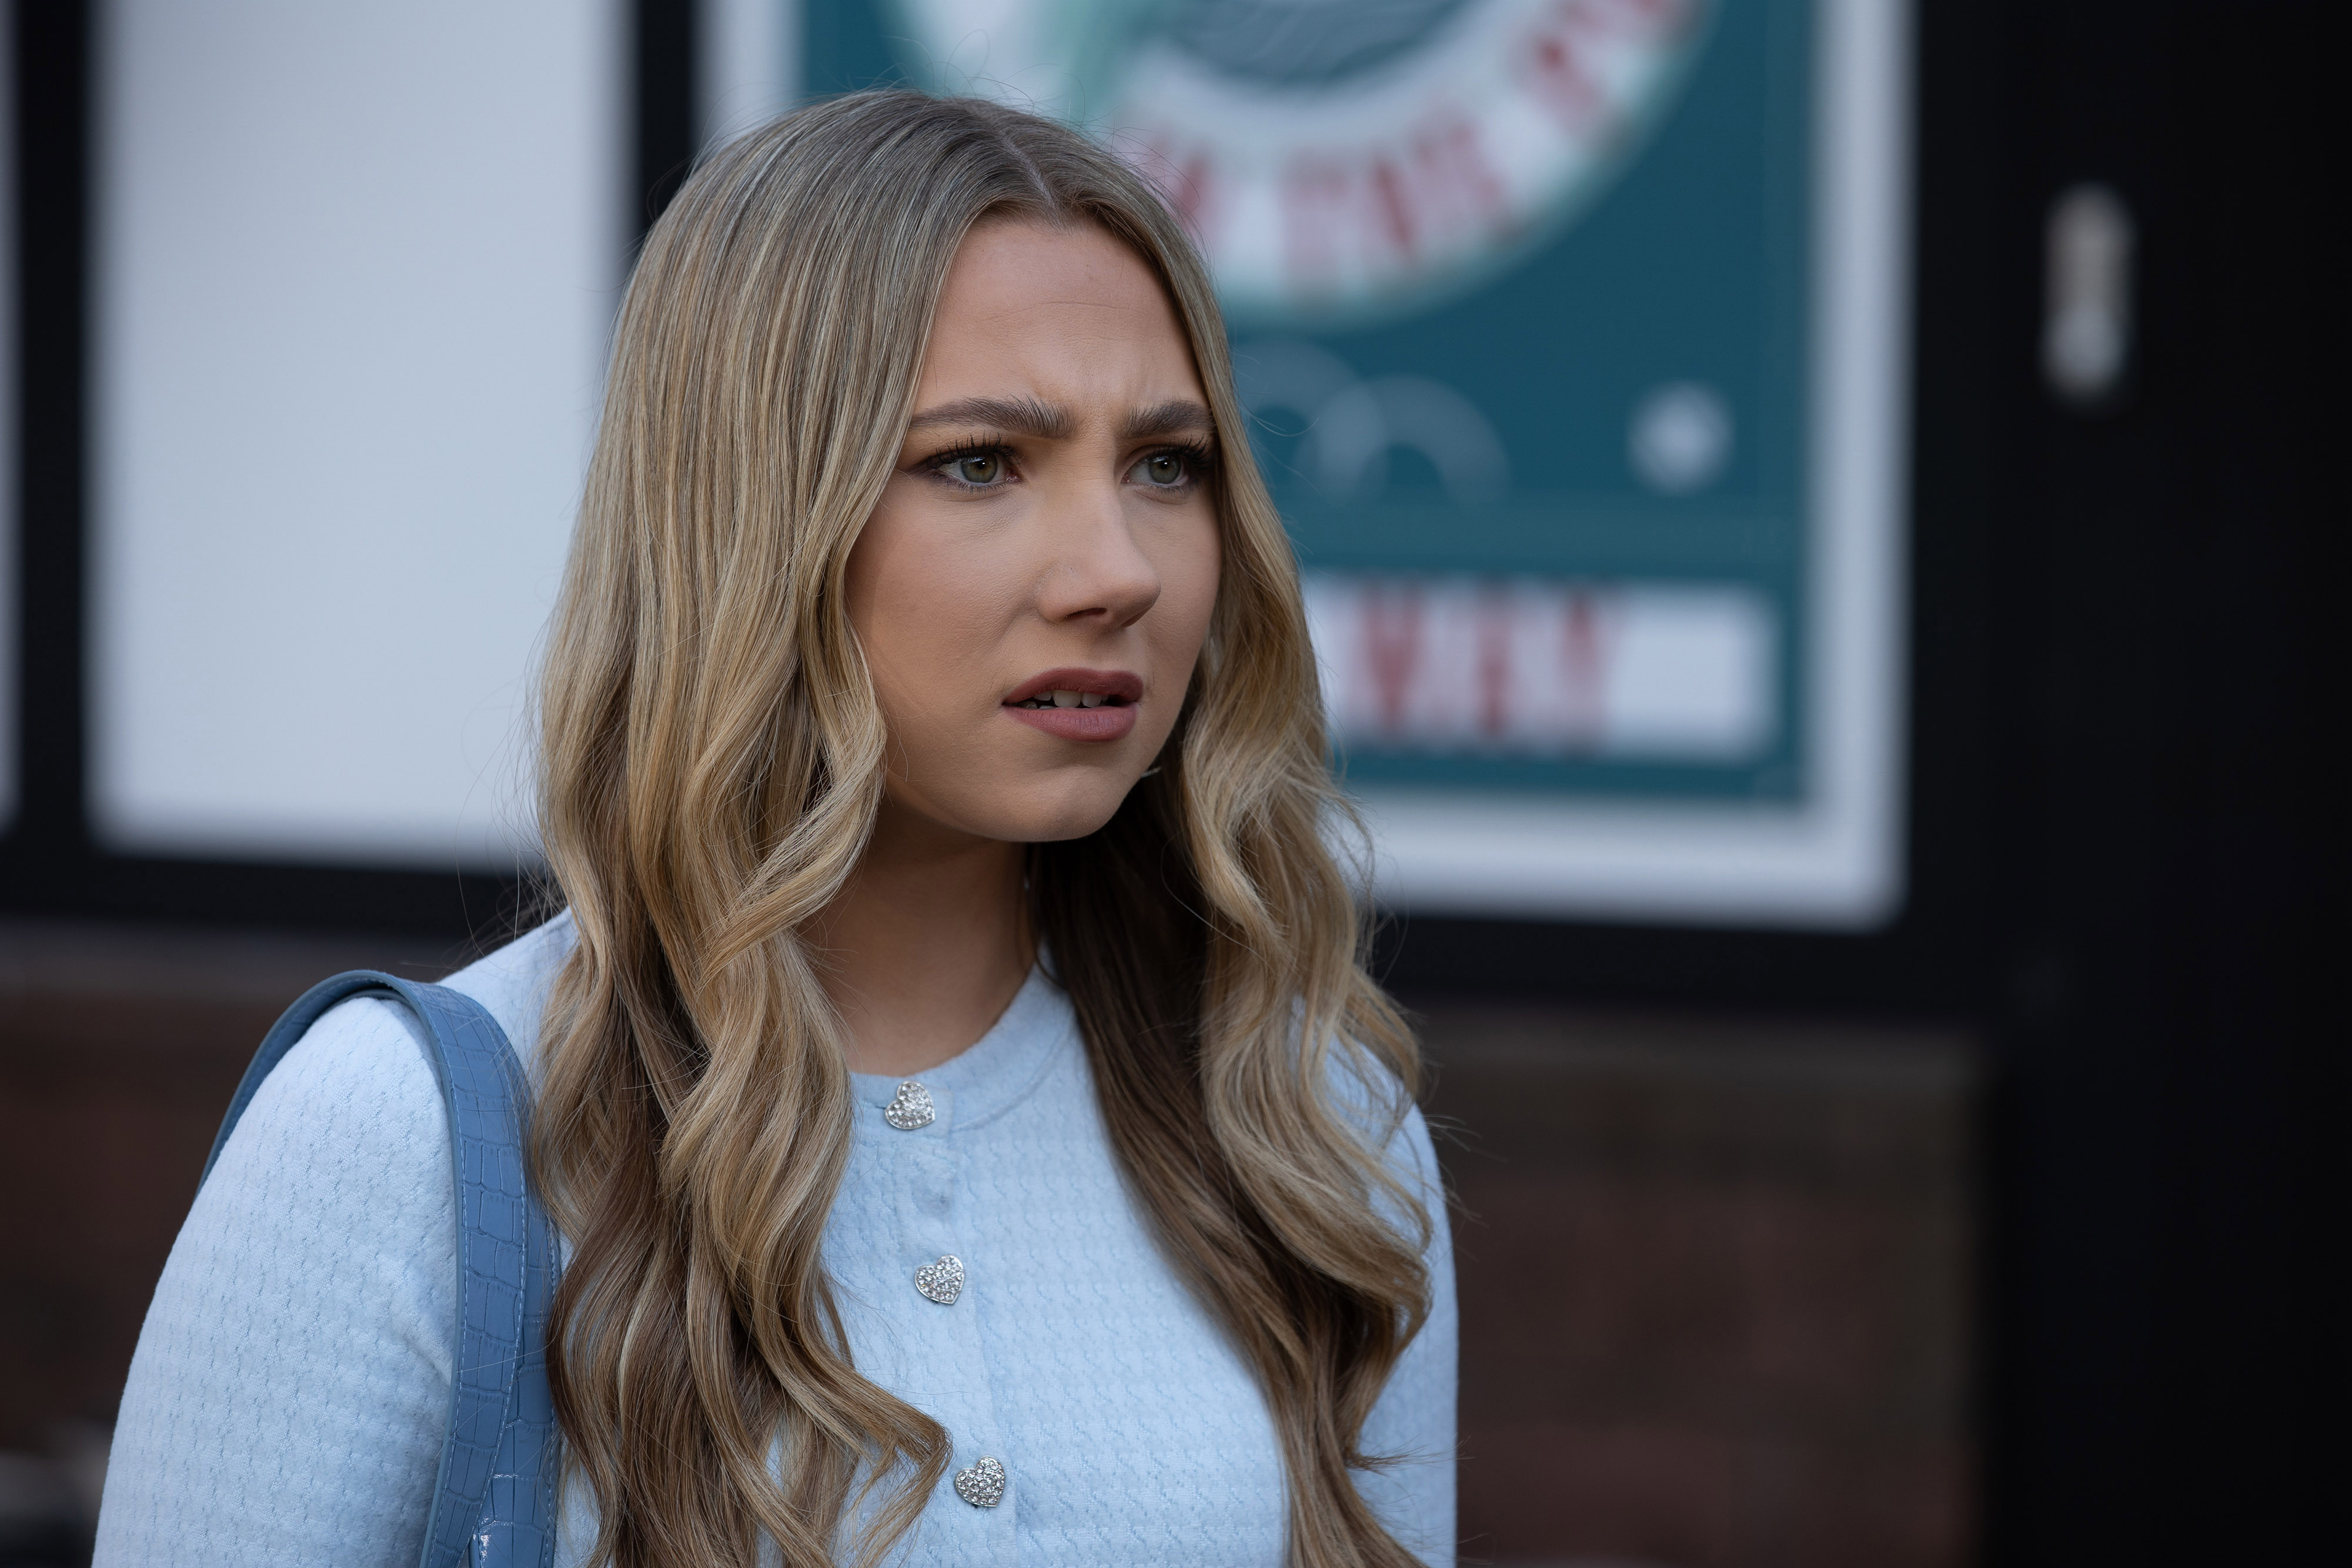 Hollyoaks casts Anya Lawrence as Scott Drinkwell's foster daughter